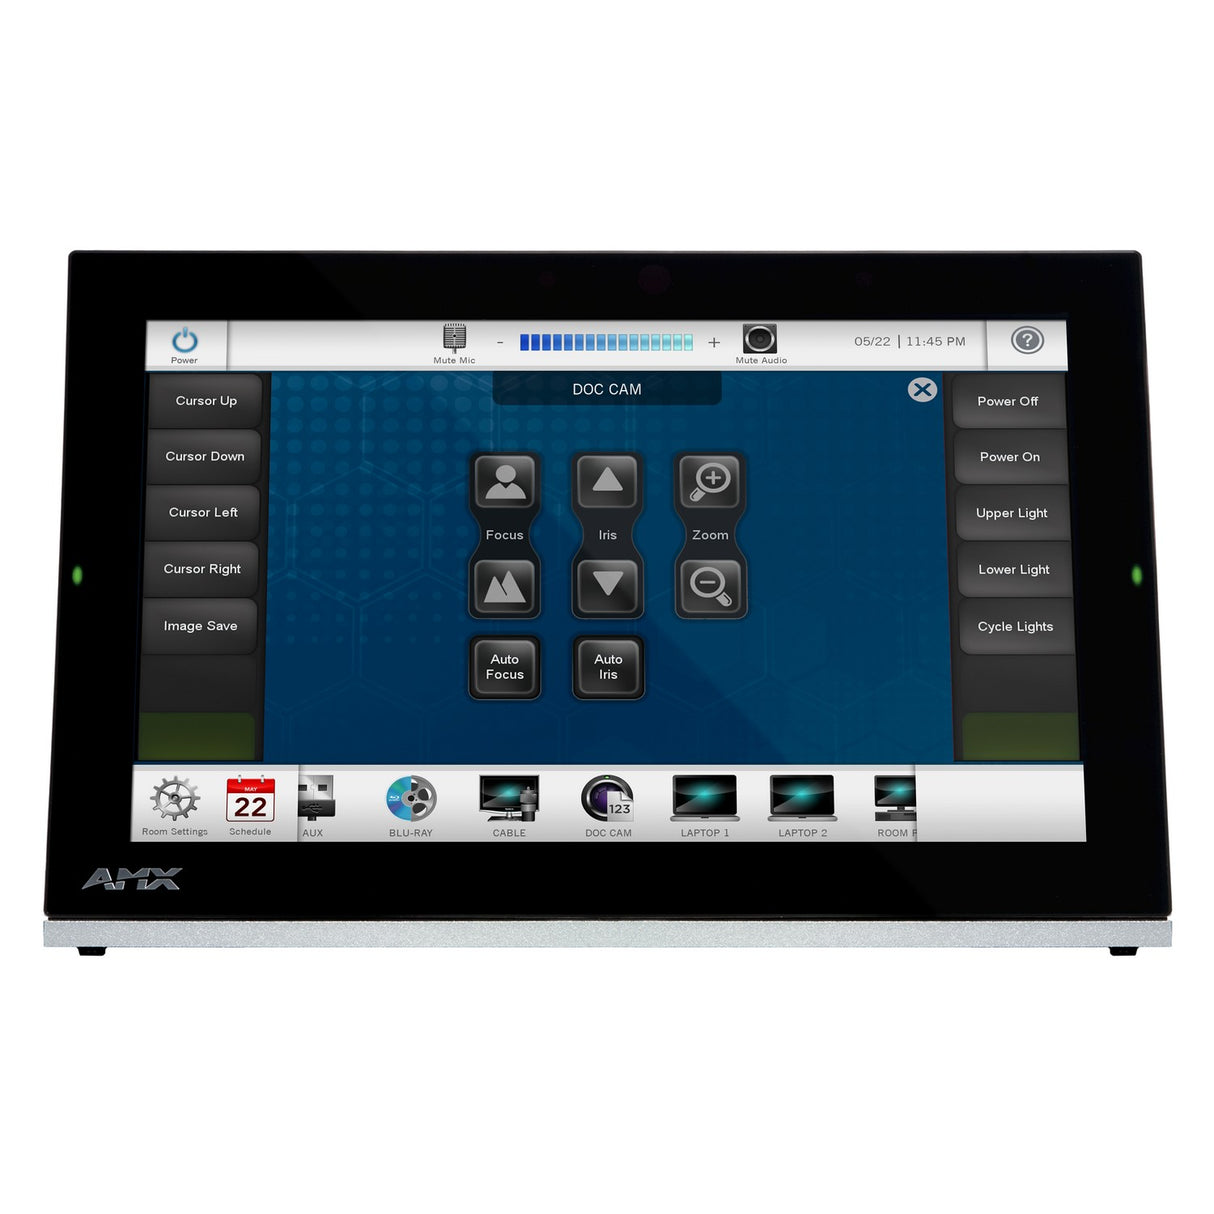 AMX MT-1002 Modero G5 10.1-Inch Tabletop Touch Control Panel